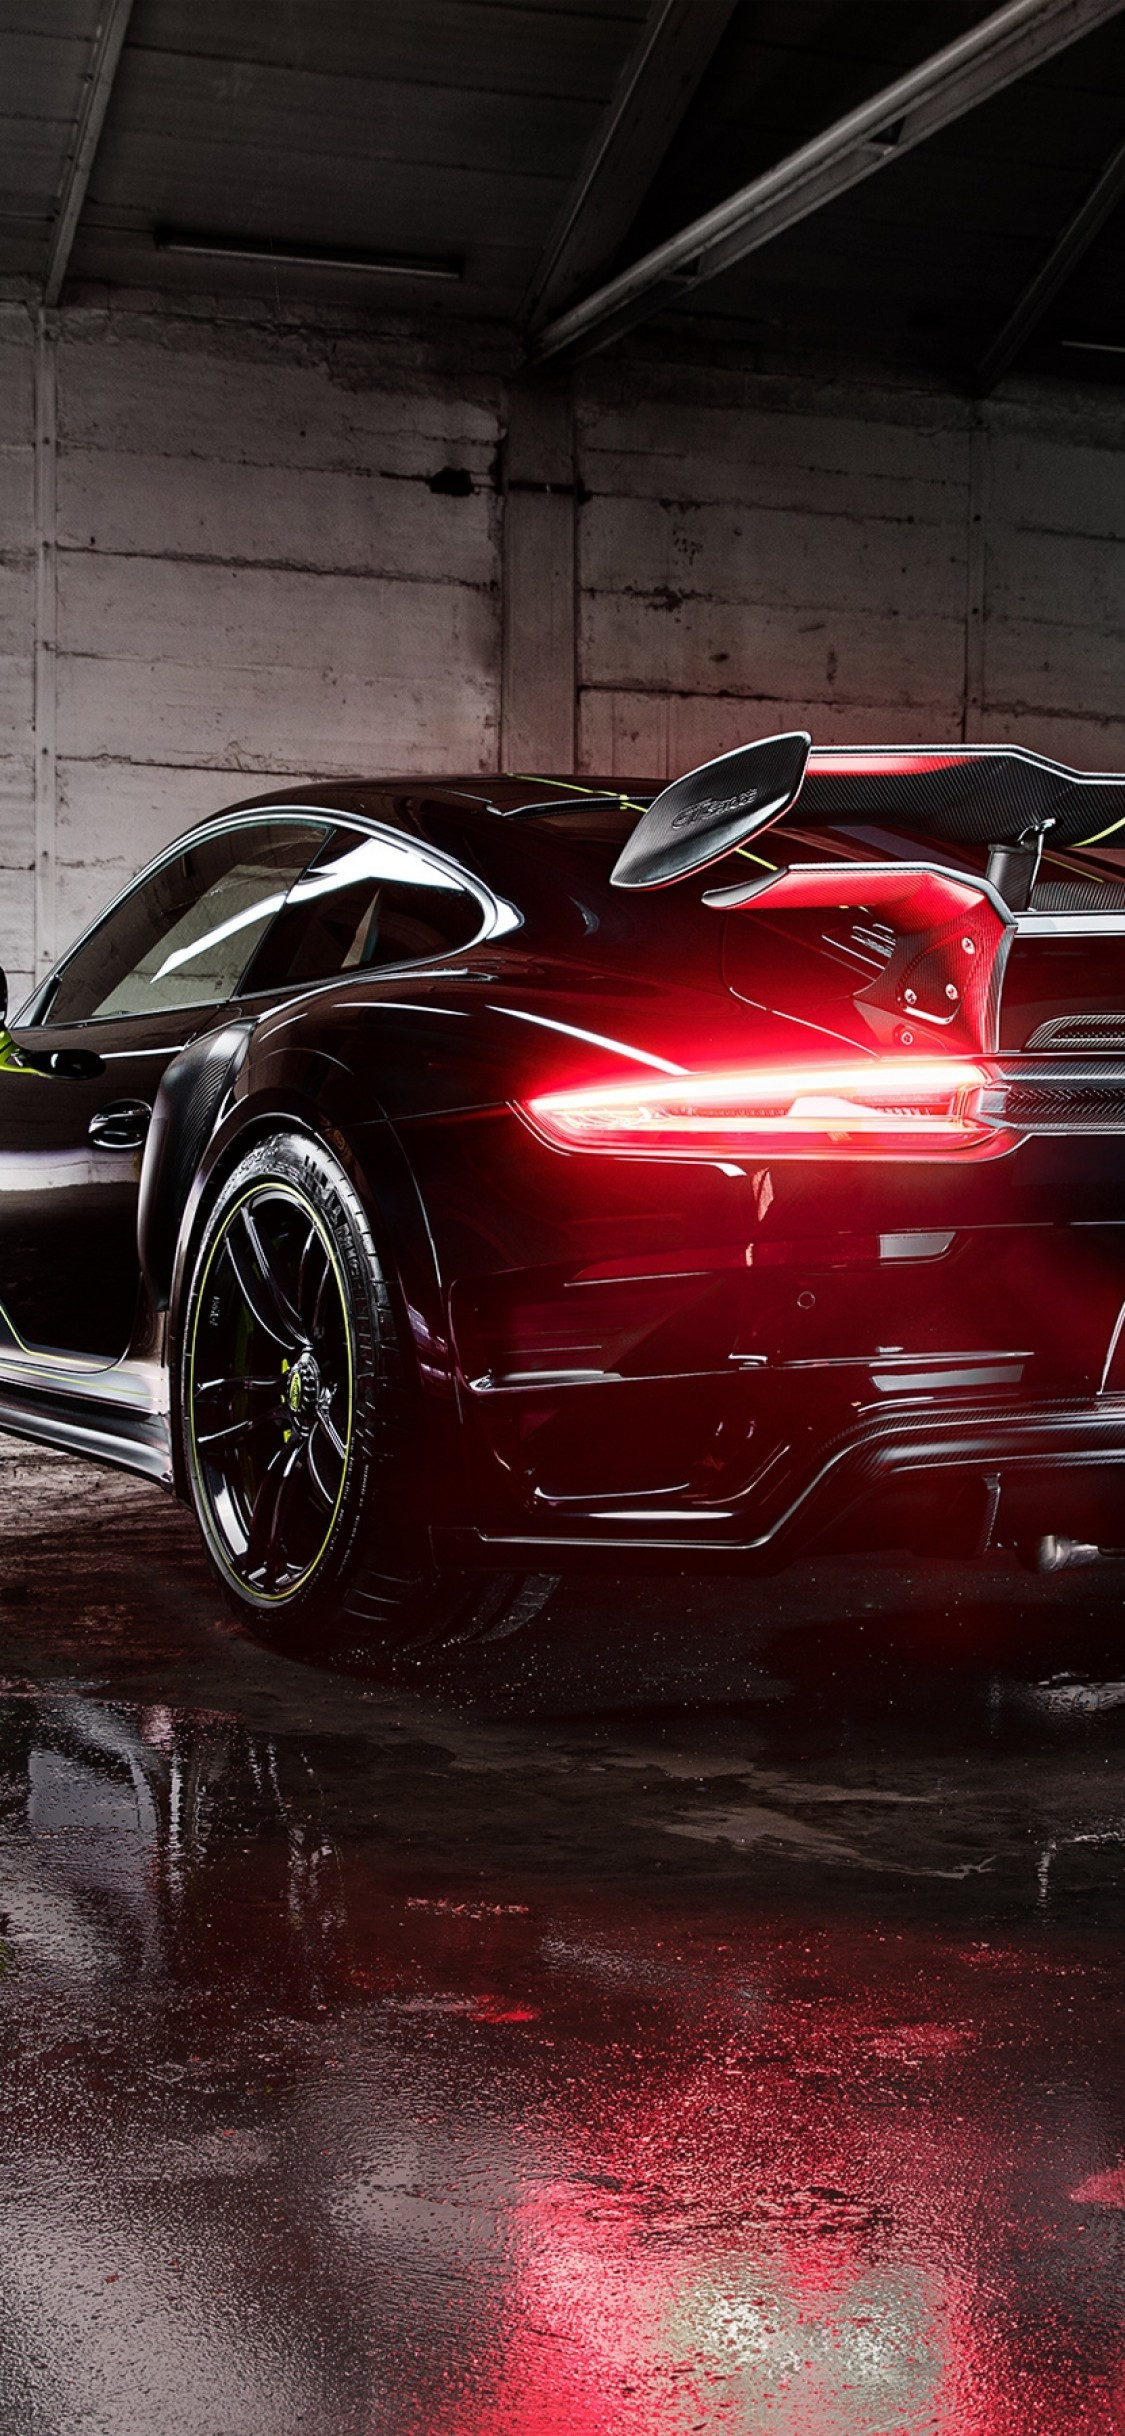 Download 1125x2436 Porsche 911 Turbo Gt, Back View, Black, Supercar, Cars Wallpaper for iPhone 11 Pro & X